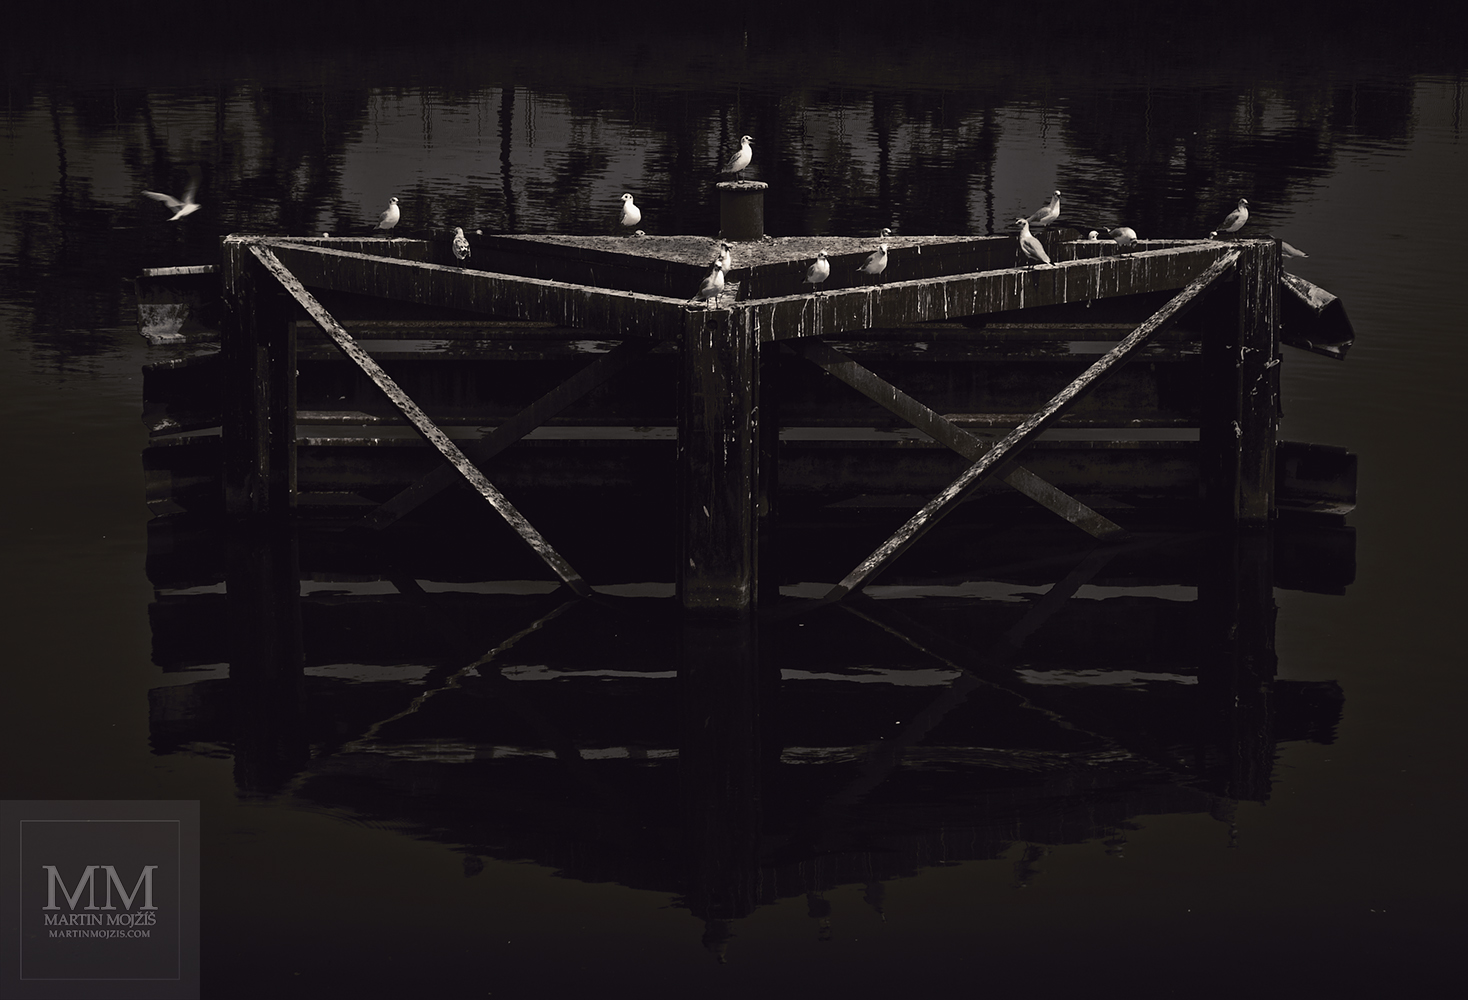 Water birds sitting on a structure used for mooring boats. Fine Art photograph of Martin Mojzis with the title BIRDS.